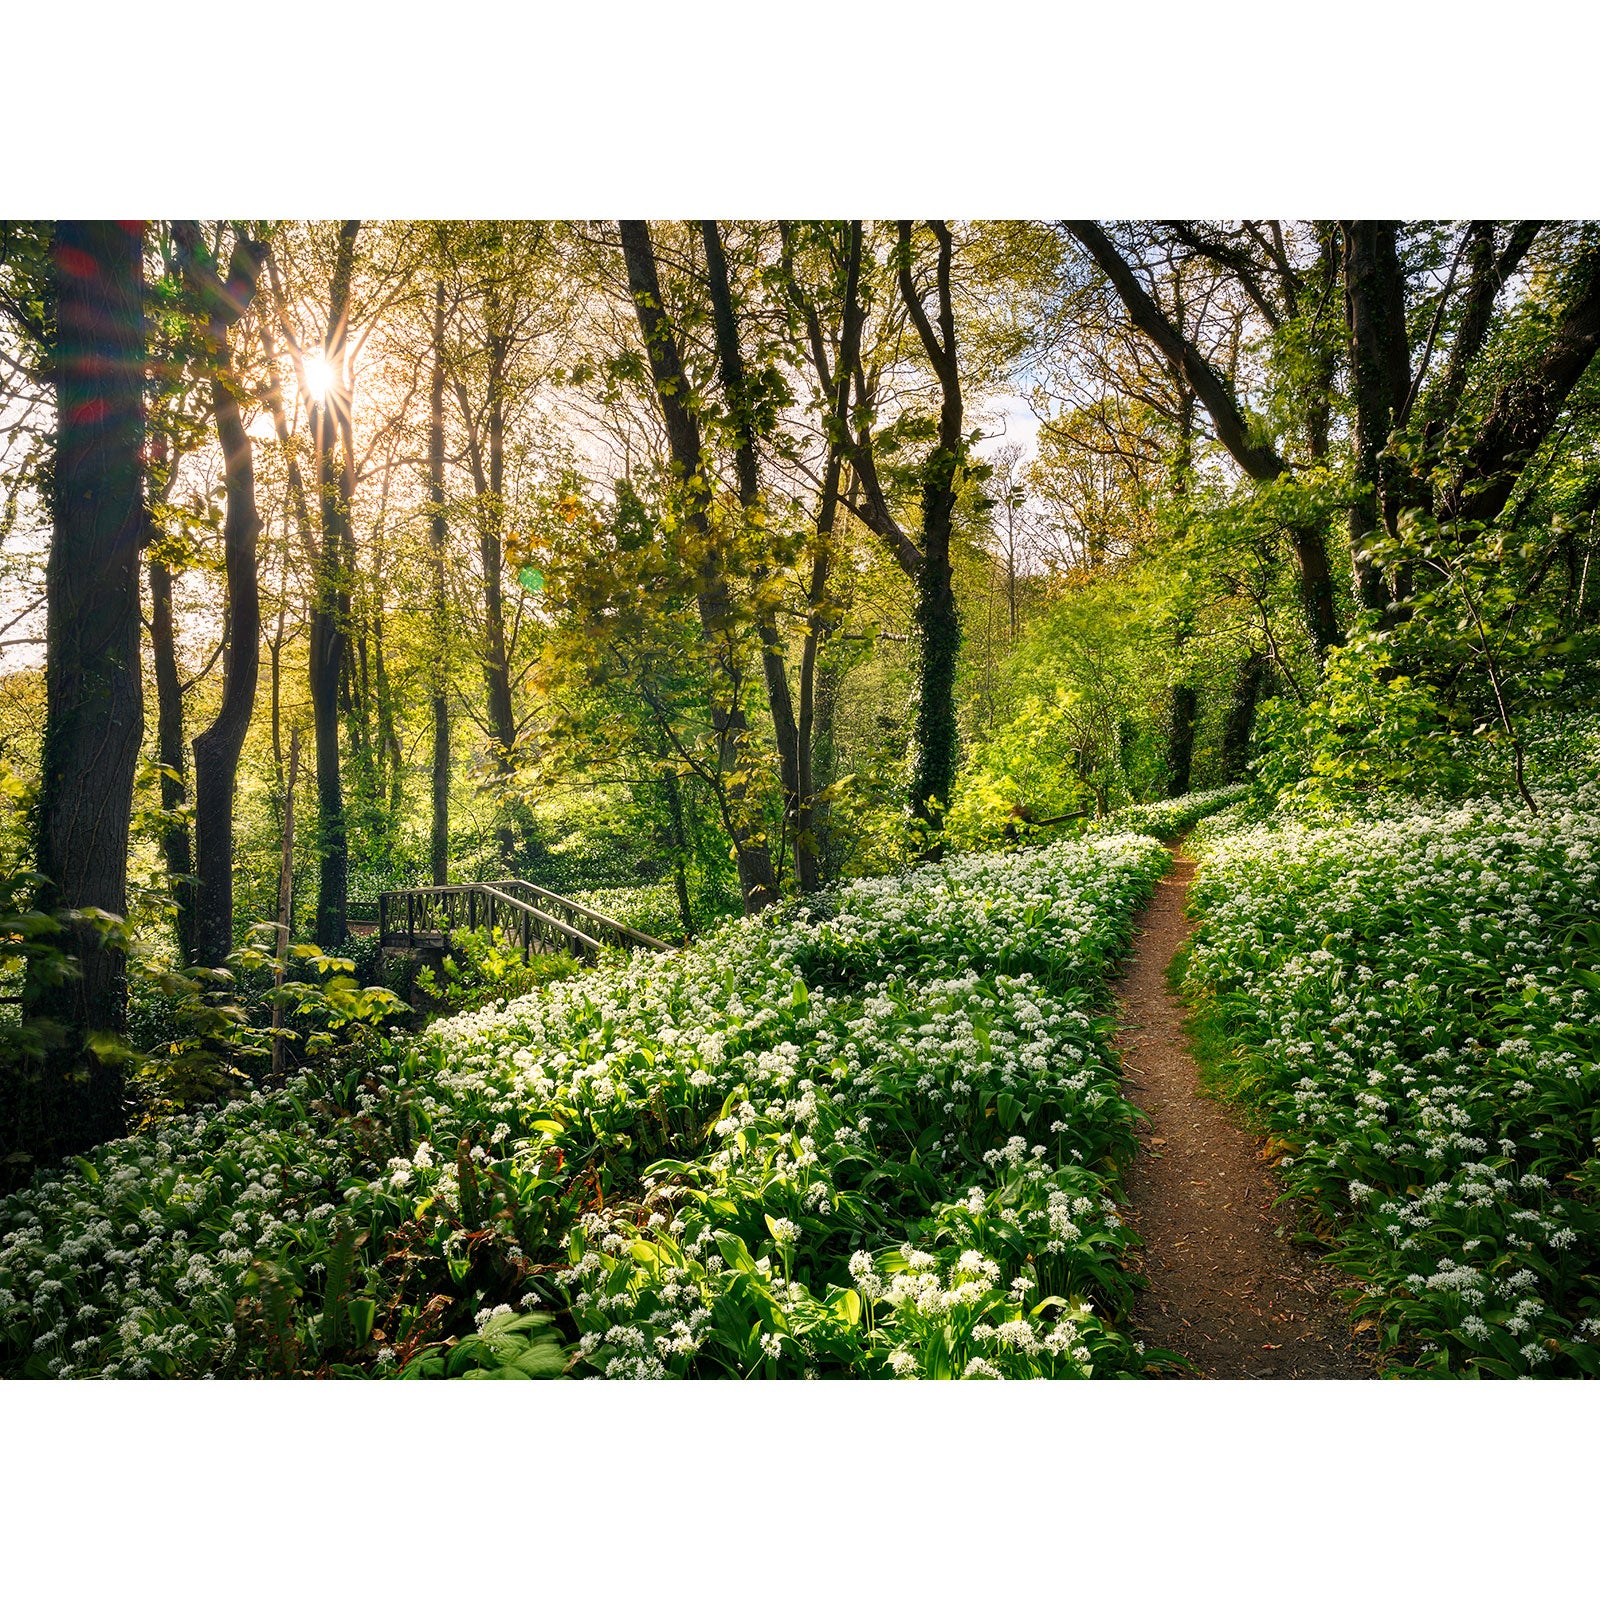 A Shorwell forest path lined with blooming white wildflowers and lush greenery, with a wooden bridge in the background on the Isle of Wight, captured by Available Light Photography.